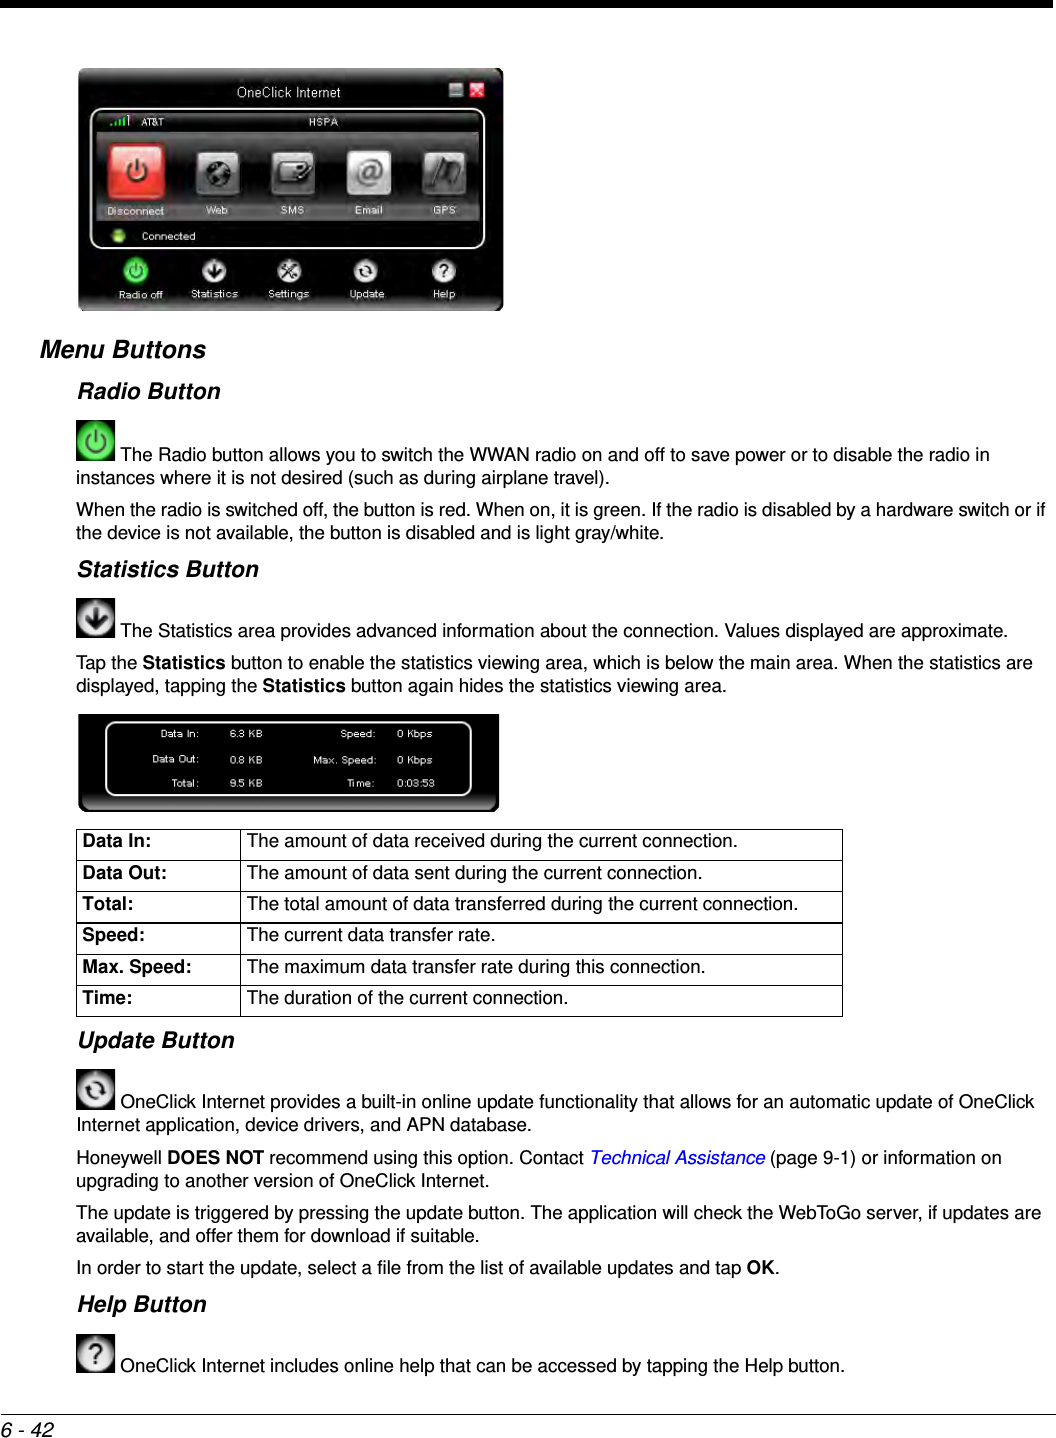 6 - 42Menu ButtonsRadio Button The Radio button allows you to switch the WWAN radio on and off to save power or to disable the radio in instances where it is not desired (such as during airplane travel).When the radio is switched off, the button is red. When on, it is green. If the radio is disabled by a hardware switch or if the device is not available, the button is disabled and is light gray/white.Statistics Button The Statistics area provides advanced information about the connection. Values displayed are approximate.Tap the Statistics button to enable the statistics viewing area, which is below the main area. When the statistics are displayed, tapping the Statistics button again hides the statistics viewing area.Update Button OneClick Internet provides a built-in online update functionality that allows for an automatic update of OneClick Internet application, device drivers, and APN database.Honeywell DOES NOT recommend using this option. Contact Technical Assistance (page 9-1) or information on upgrading to another version of OneClick Internet.The update is triggered by pressing the update button. The application will check the WebToGo server, if updates are available, and offer them for download if suitable.In order to start the update, select a file from the list of available updates and tap OK.Help Button OneClick Internet includes online help that can be accessed by tapping the Help button.Data In: The amount of data received during the current connection.Data Out: The amount of data sent during the current connection. Total: The total amount of data transferred during the current connection.Speed: The current data transfer rate.Max. Speed: The maximum data transfer rate during this connection.Time: The duration of the current connection.